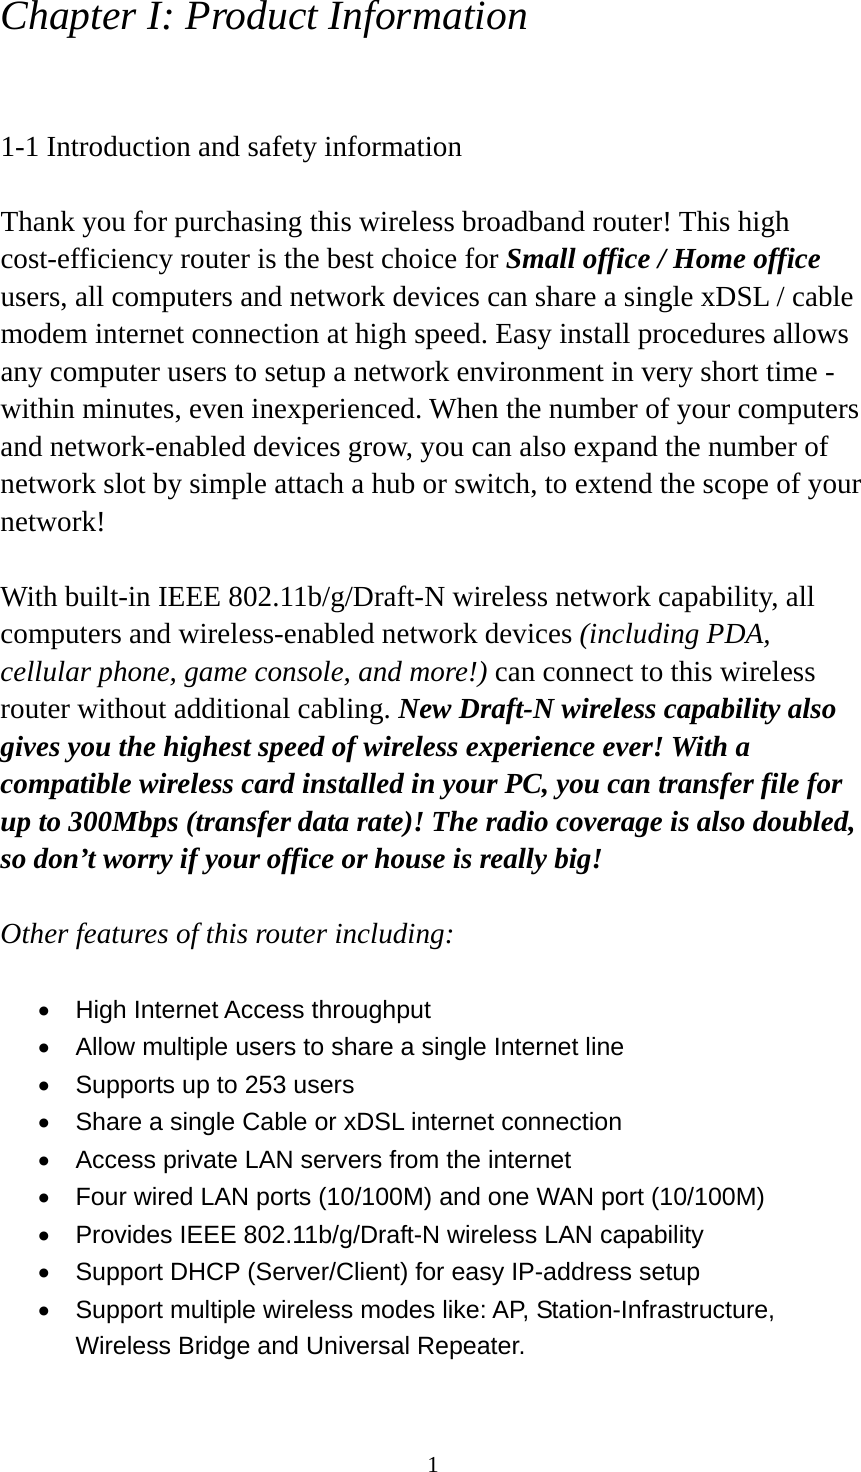 1 Chapter I: Product Information  1-1 Introduction and safety information  Thank you for purchasing this wireless broadband router! This high cost-efficiency router is the best choice for Small office / Home office users, all computers and network devices can share a single xDSL / cable modem internet connection at high speed. Easy install procedures allows any computer users to setup a network environment in very short time - within minutes, even inexperienced. When the number of your computers and network-enabled devices grow, you can also expand the number of network slot by simple attach a hub or switch, to extend the scope of your network!  With built-in IEEE 802.11b/g/Draft-N wireless network capability, all computers and wireless-enabled network devices (including PDA, cellular phone, game console, and more!) can connect to this wireless router without additional cabling. New Draft-N wireless capability also gives you the highest speed of wireless experience ever! With a compatible wireless card installed in your PC, you can transfer file for up to 300Mbps (transfer data rate)! The radio coverage is also doubled, so don’t worry if your office or house is really big!  Other features of this router including:  •  High Internet Access throughput   •  Allow multiple users to share a single Internet line   •  Supports up to 253 users •  Share a single Cable or xDSL internet connection •  Access private LAN servers from the internet •  Four wired LAN ports (10/100M) and one WAN port (10/100M) •  Provides IEEE 802.11b/g/Draft-N wireless LAN capability •  Support DHCP (Server/Client) for easy IP-address setup   •  Support multiple wireless modes like: AP, Station-Infrastructure, Wireless Bridge and Universal Repeater. 